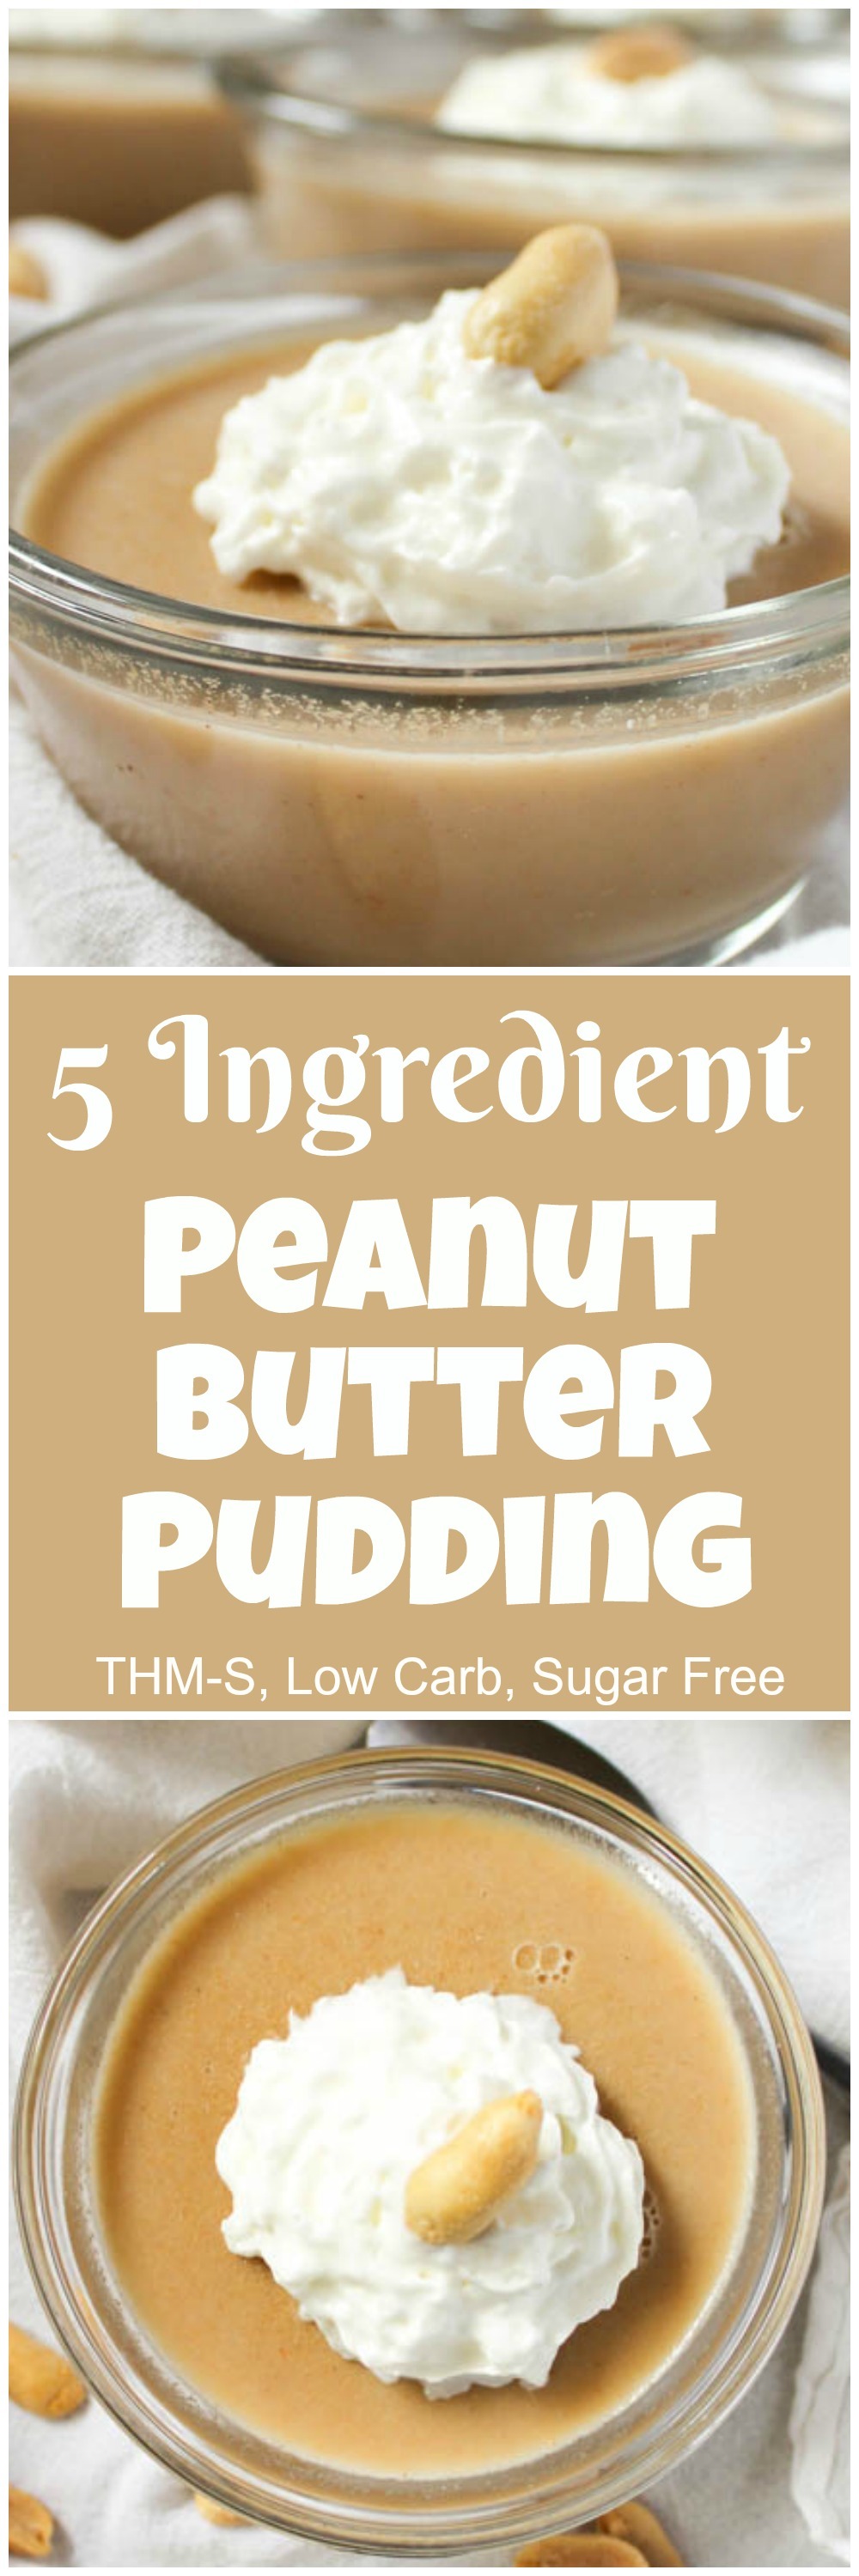 5 Ingredient Peanut Butter Pudding (THM-S, Low Carb, Sugar Free)